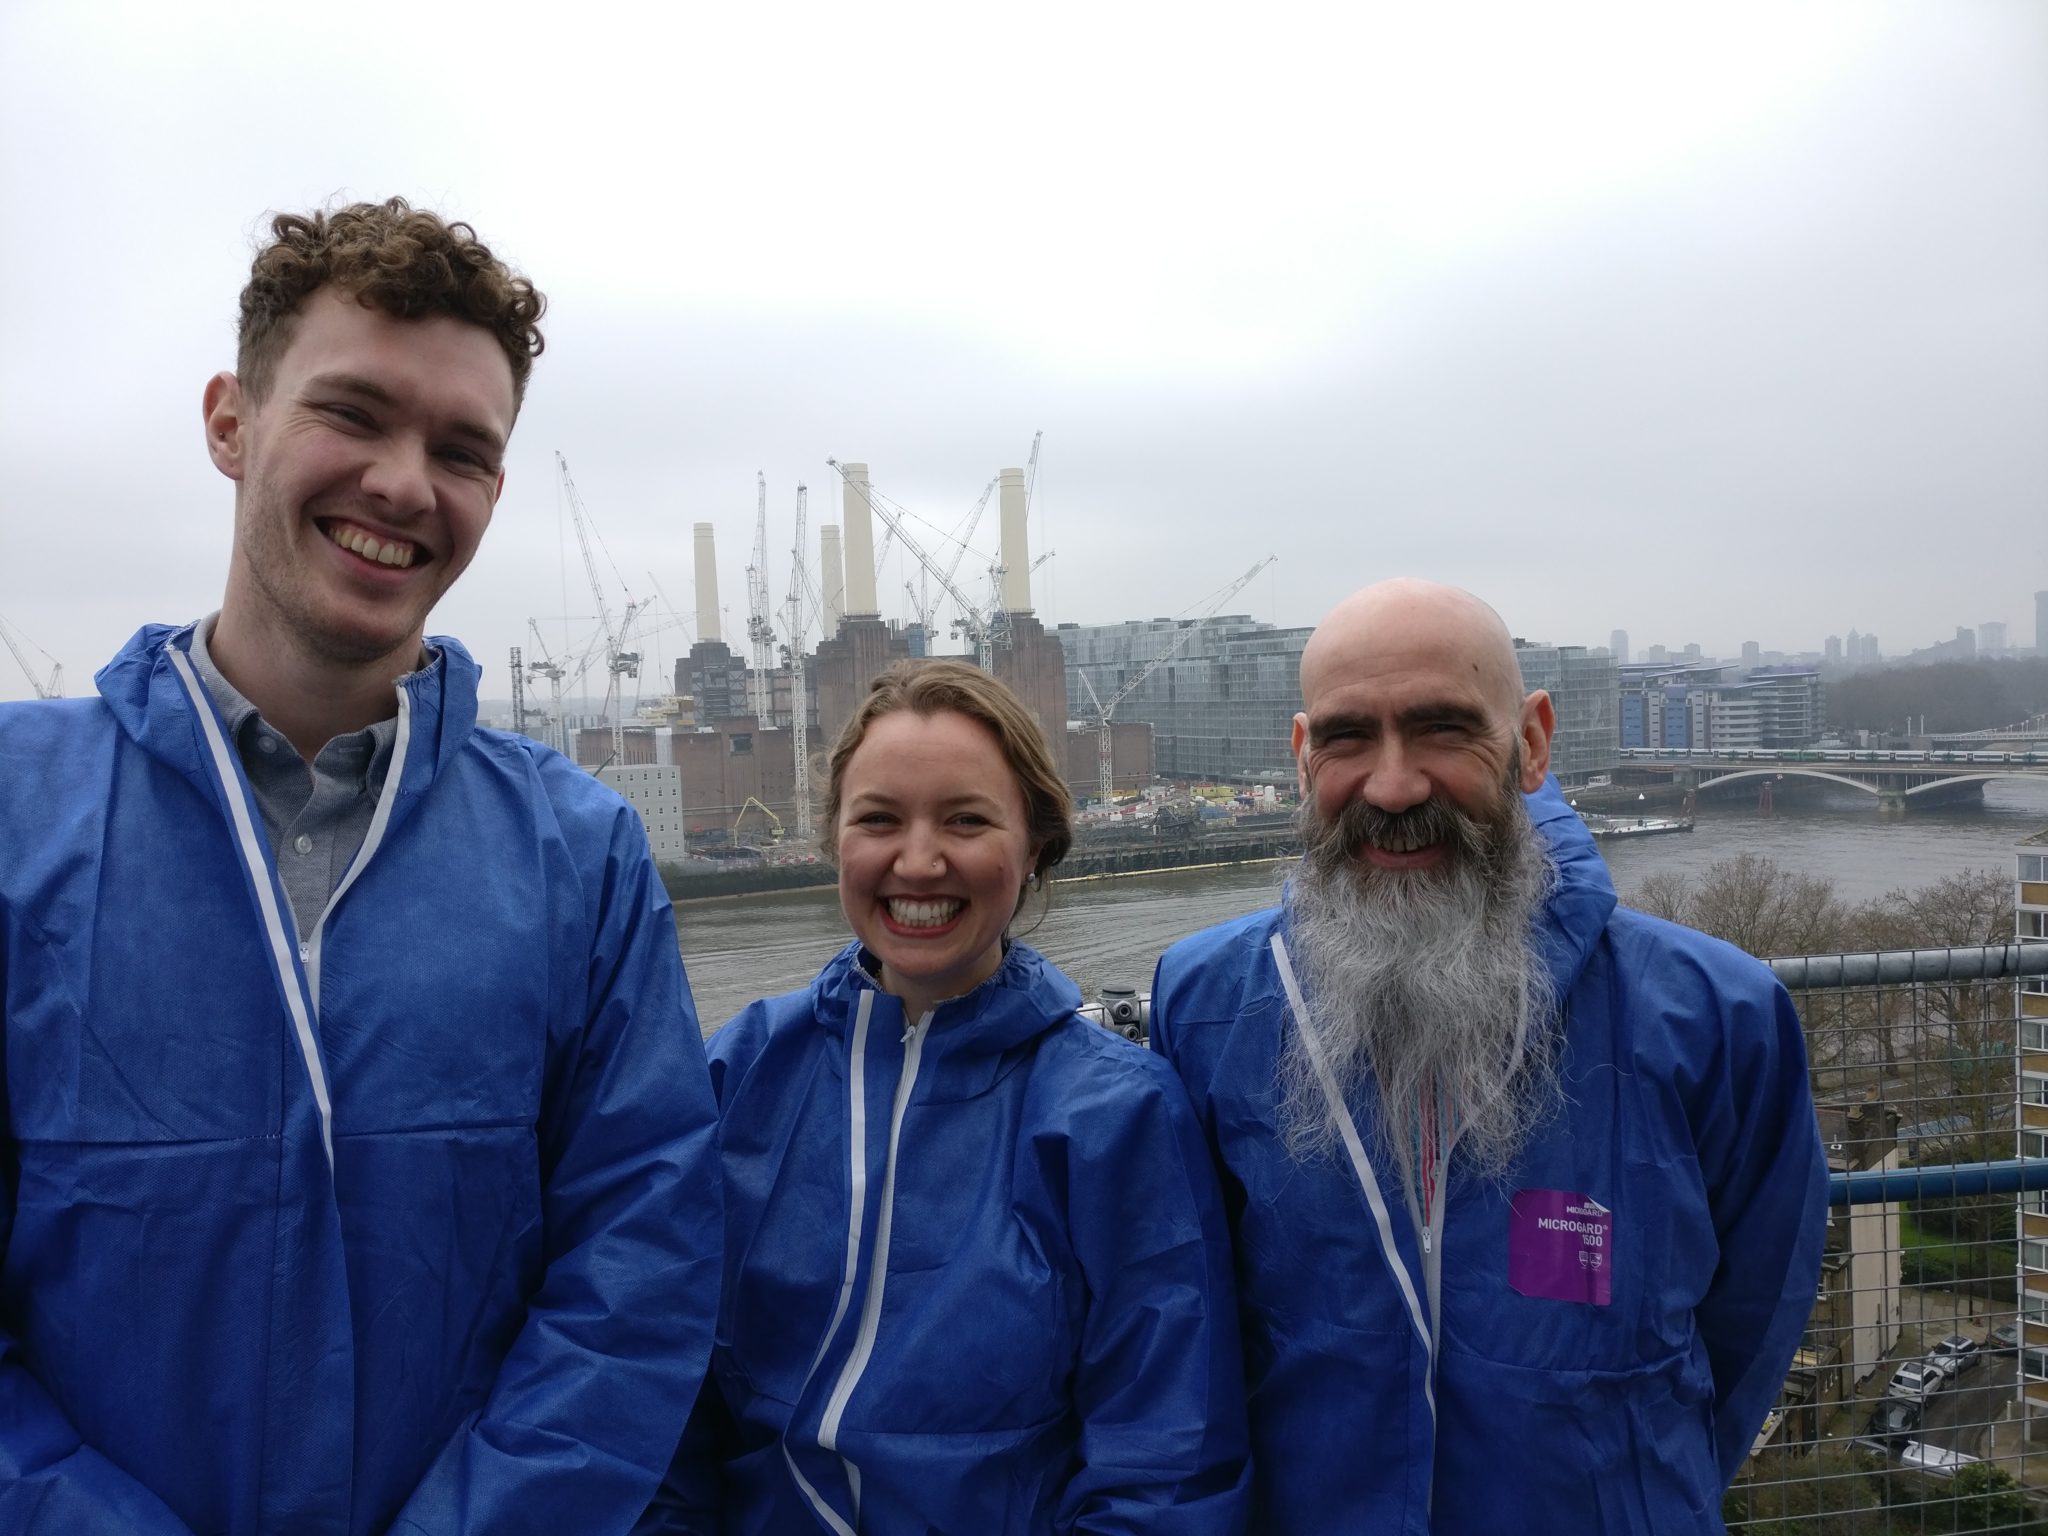 Members of the Energetik team standing on top of PDHU's accumulator tower with a view of Battersea Power Station in the background